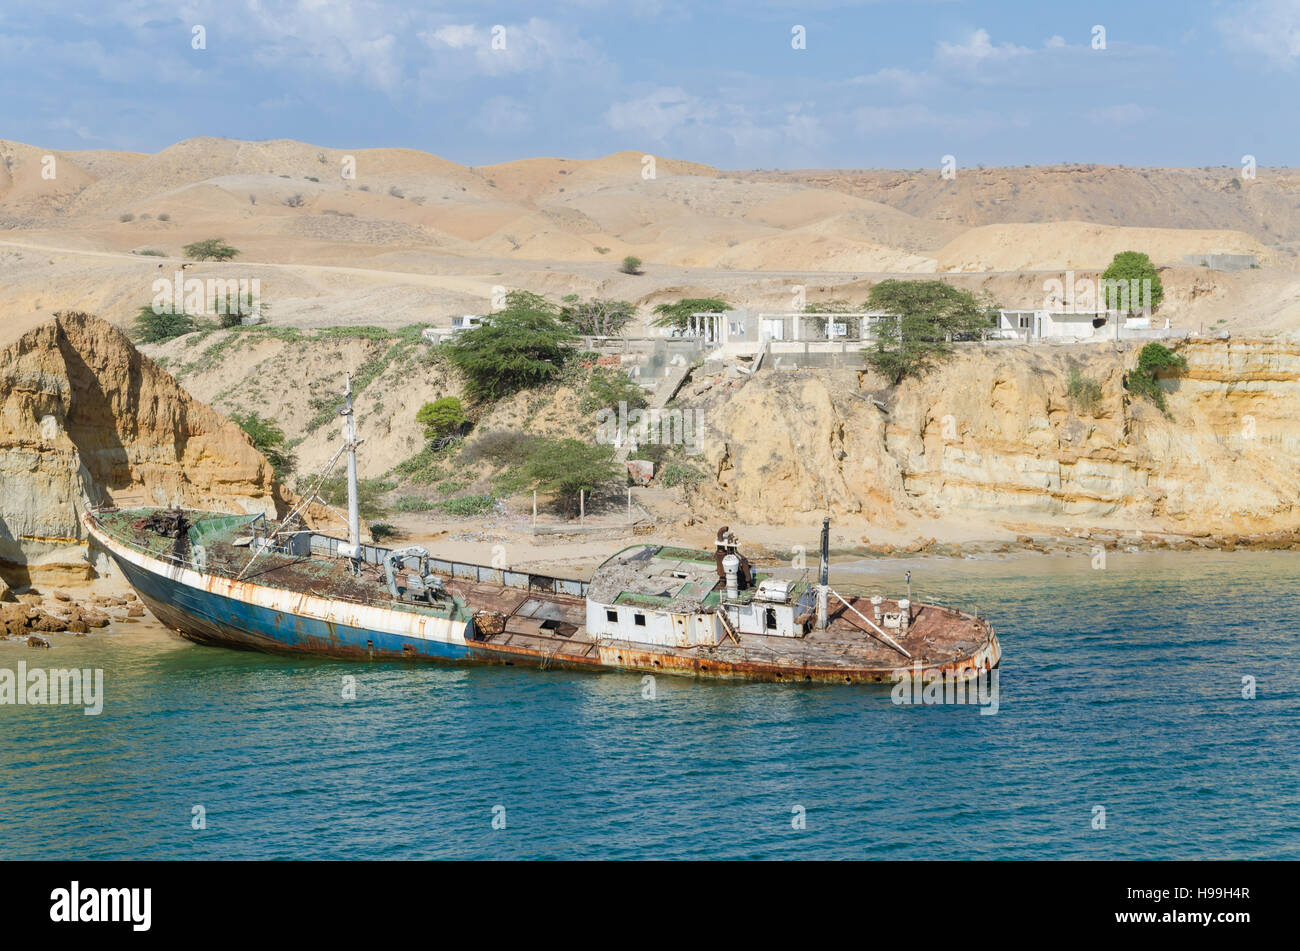 Rusting ship wreck stranded at beach of Angola's Namib coast near Caotinha. Concrete unfinished buildings and desert hills in background. Stock Photo